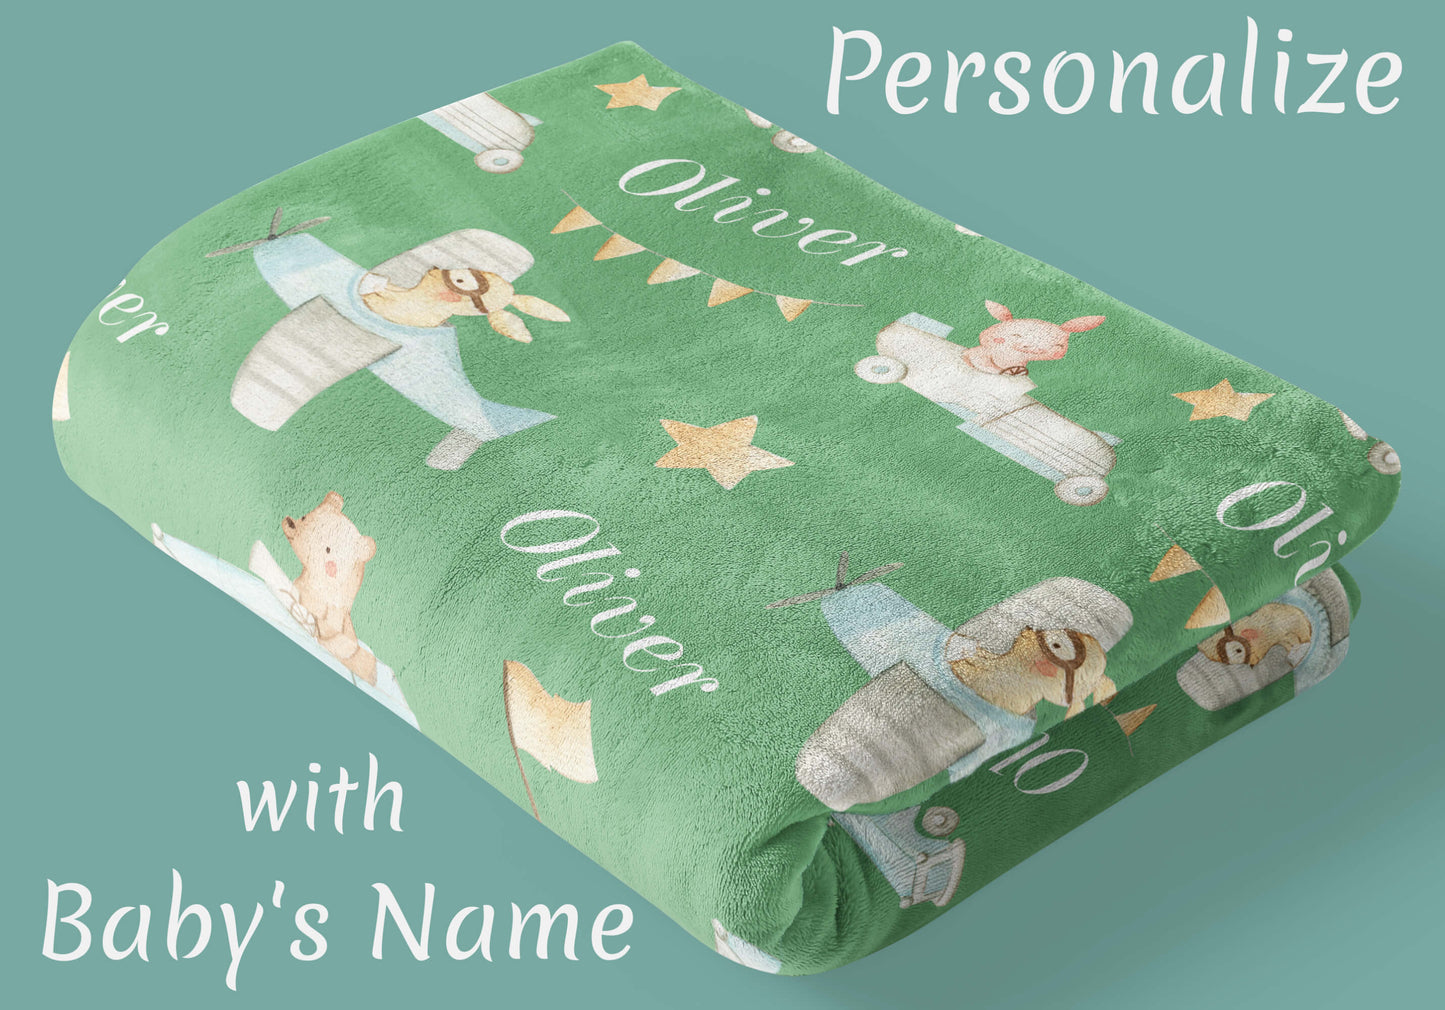 Cars and Planes - Personalized Baby Blanket for Boys with Name and Animals, Sage Green